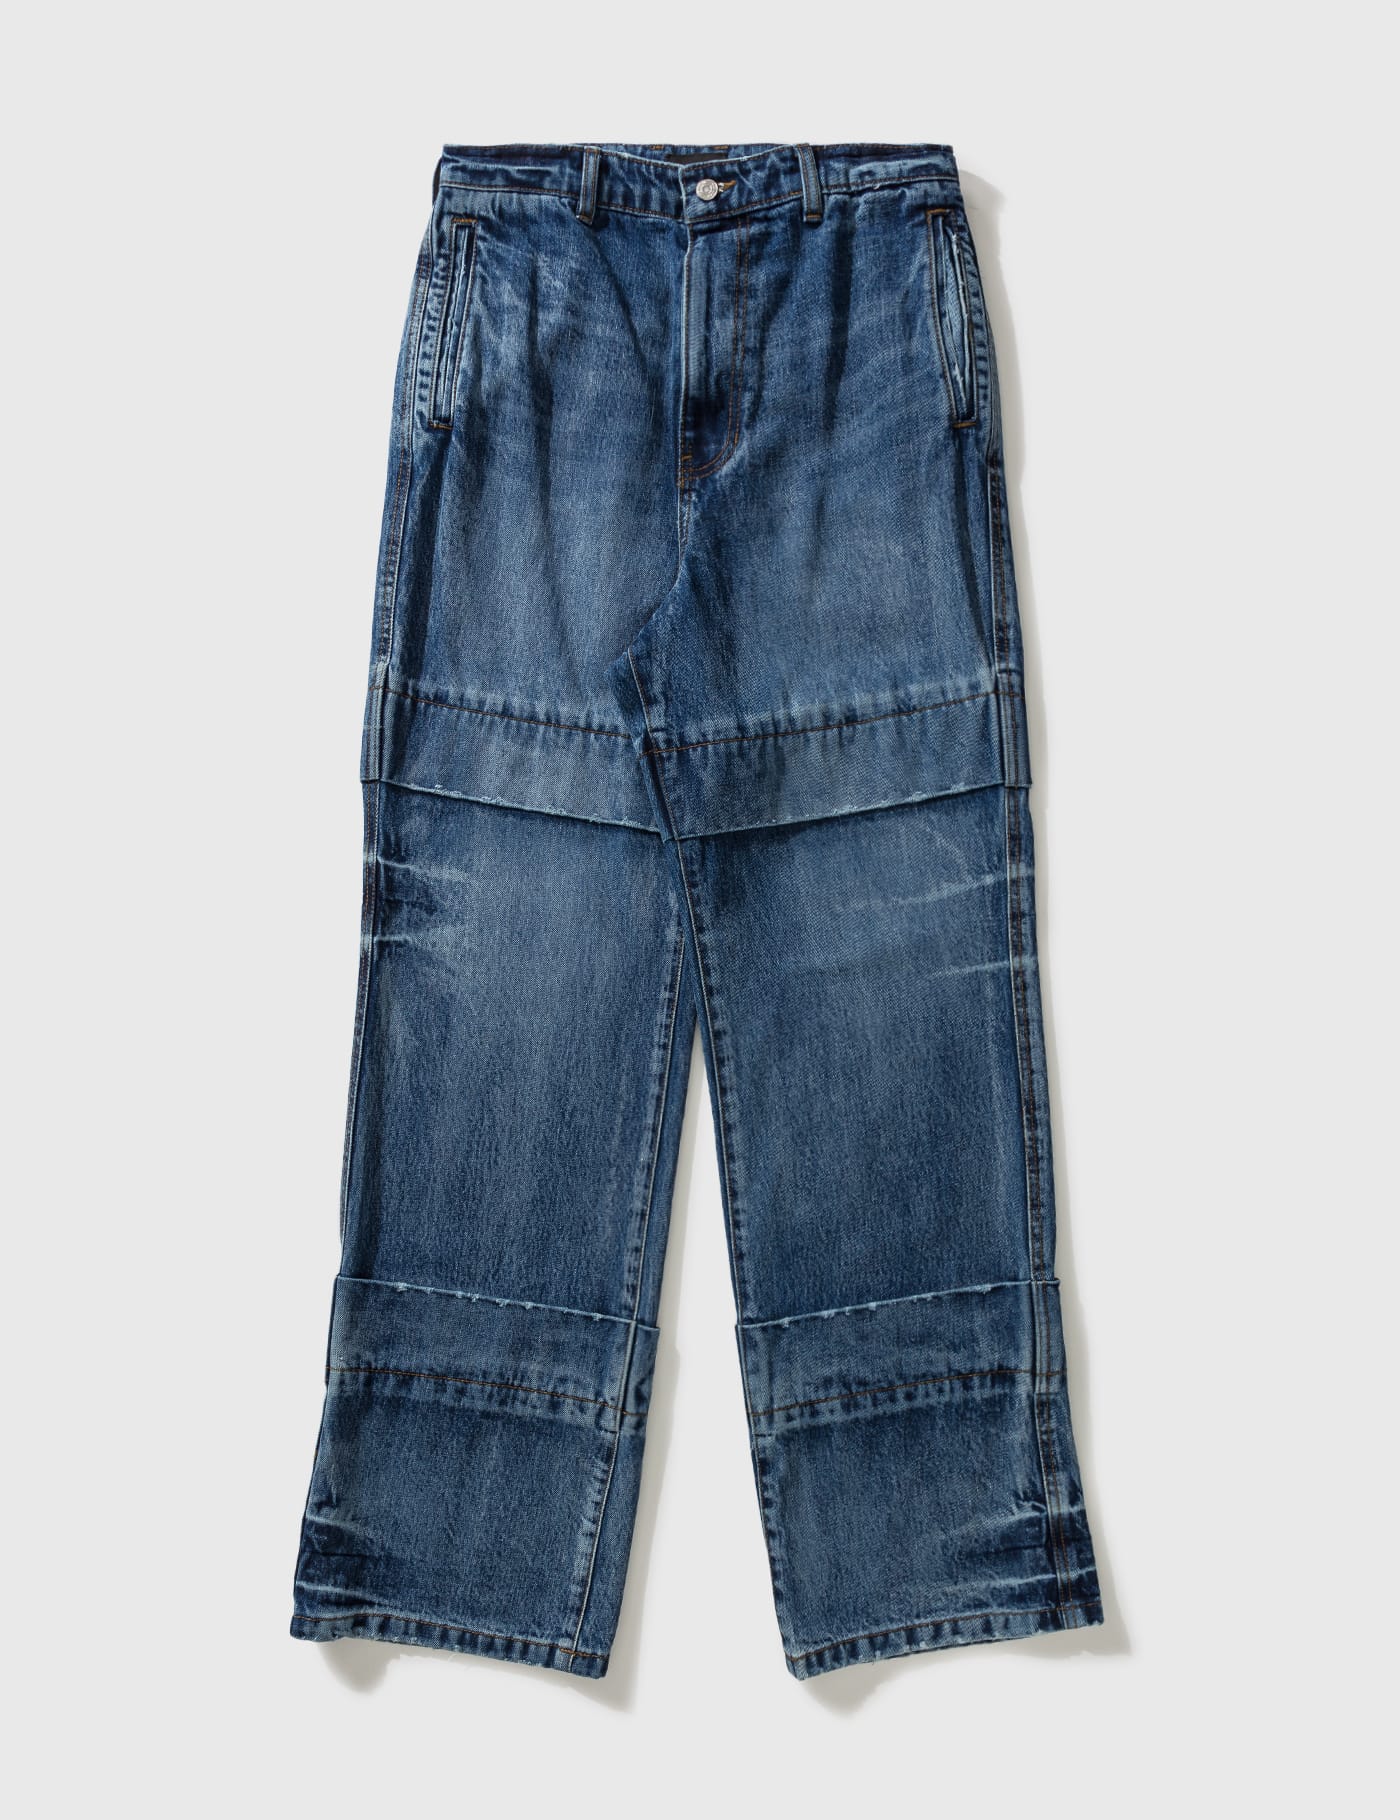 We11done - Multi-Washed Chap Jeans | HBX - Globally Curated 